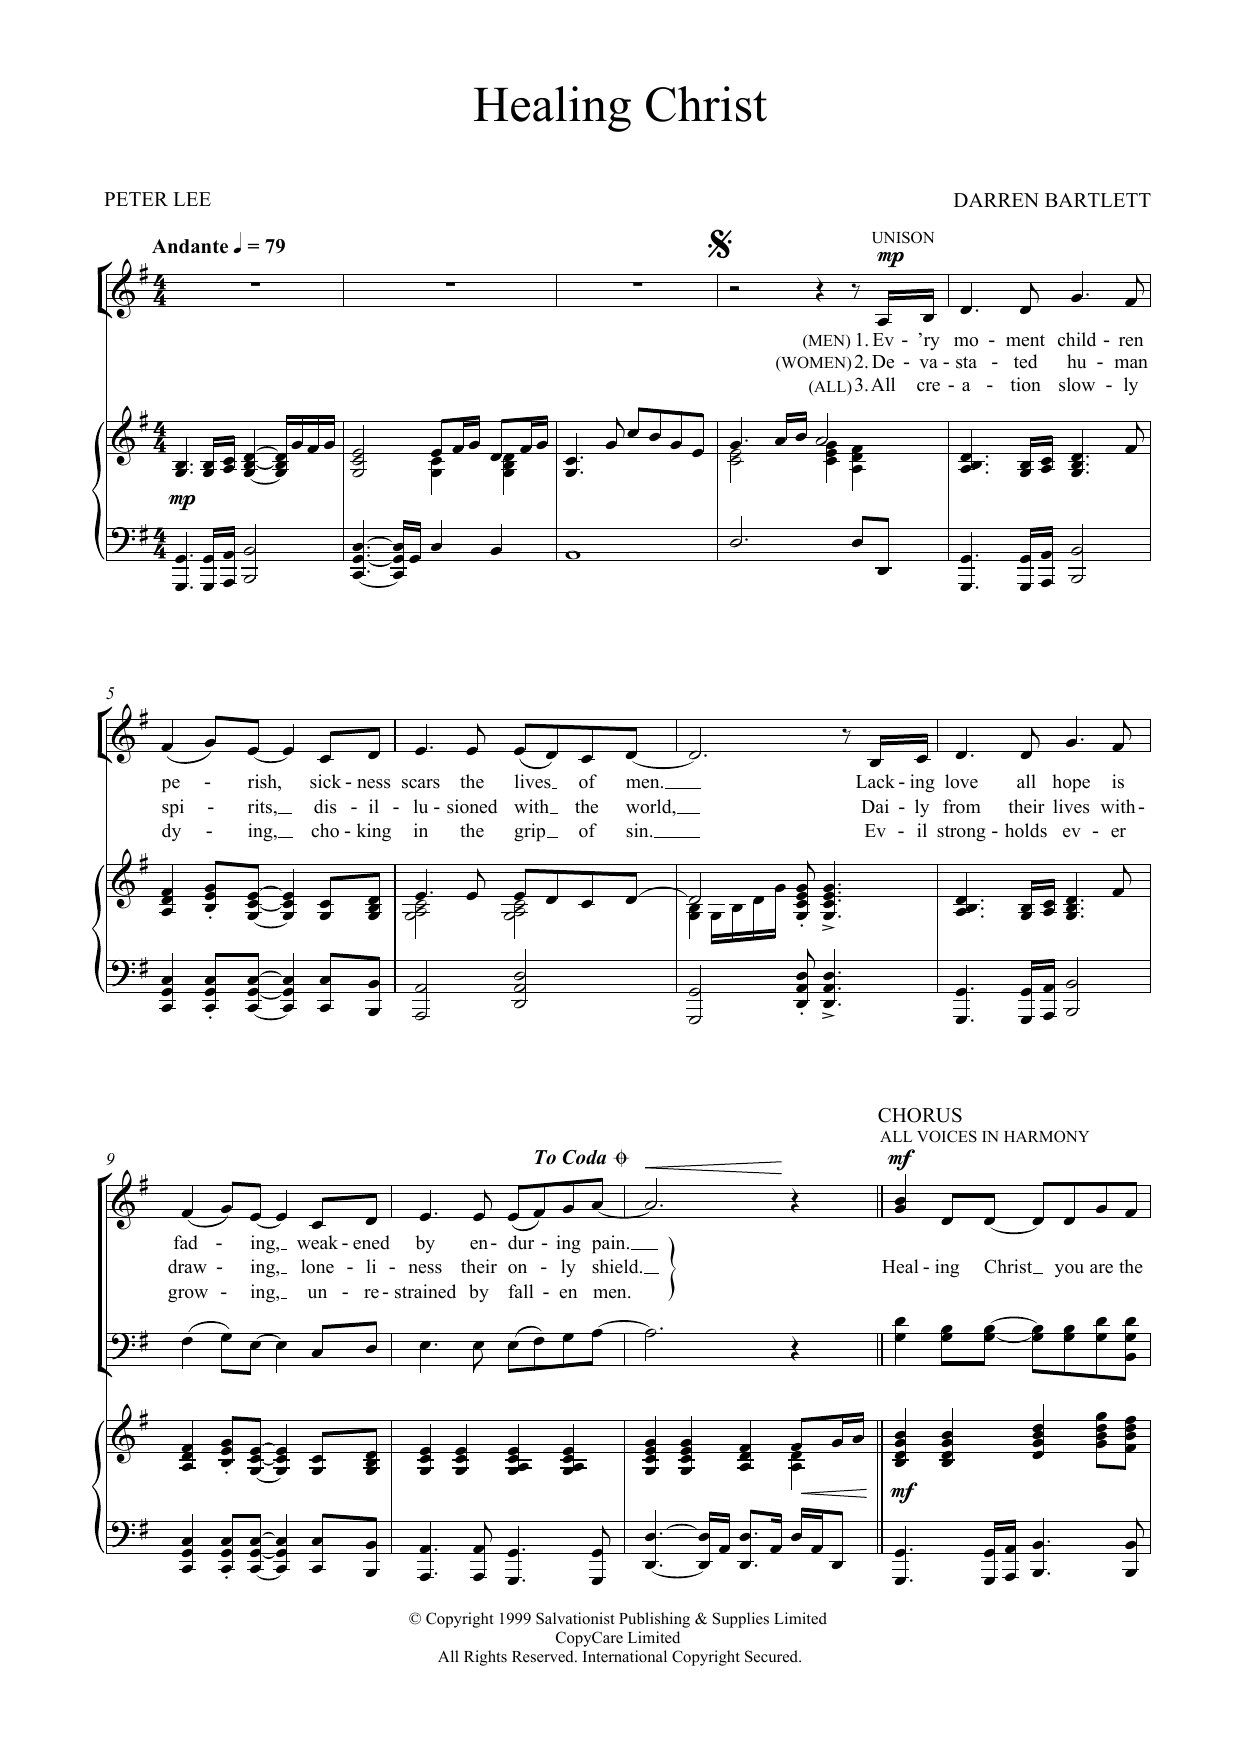 Download The Salvation Army Healing Christ Sheet Music